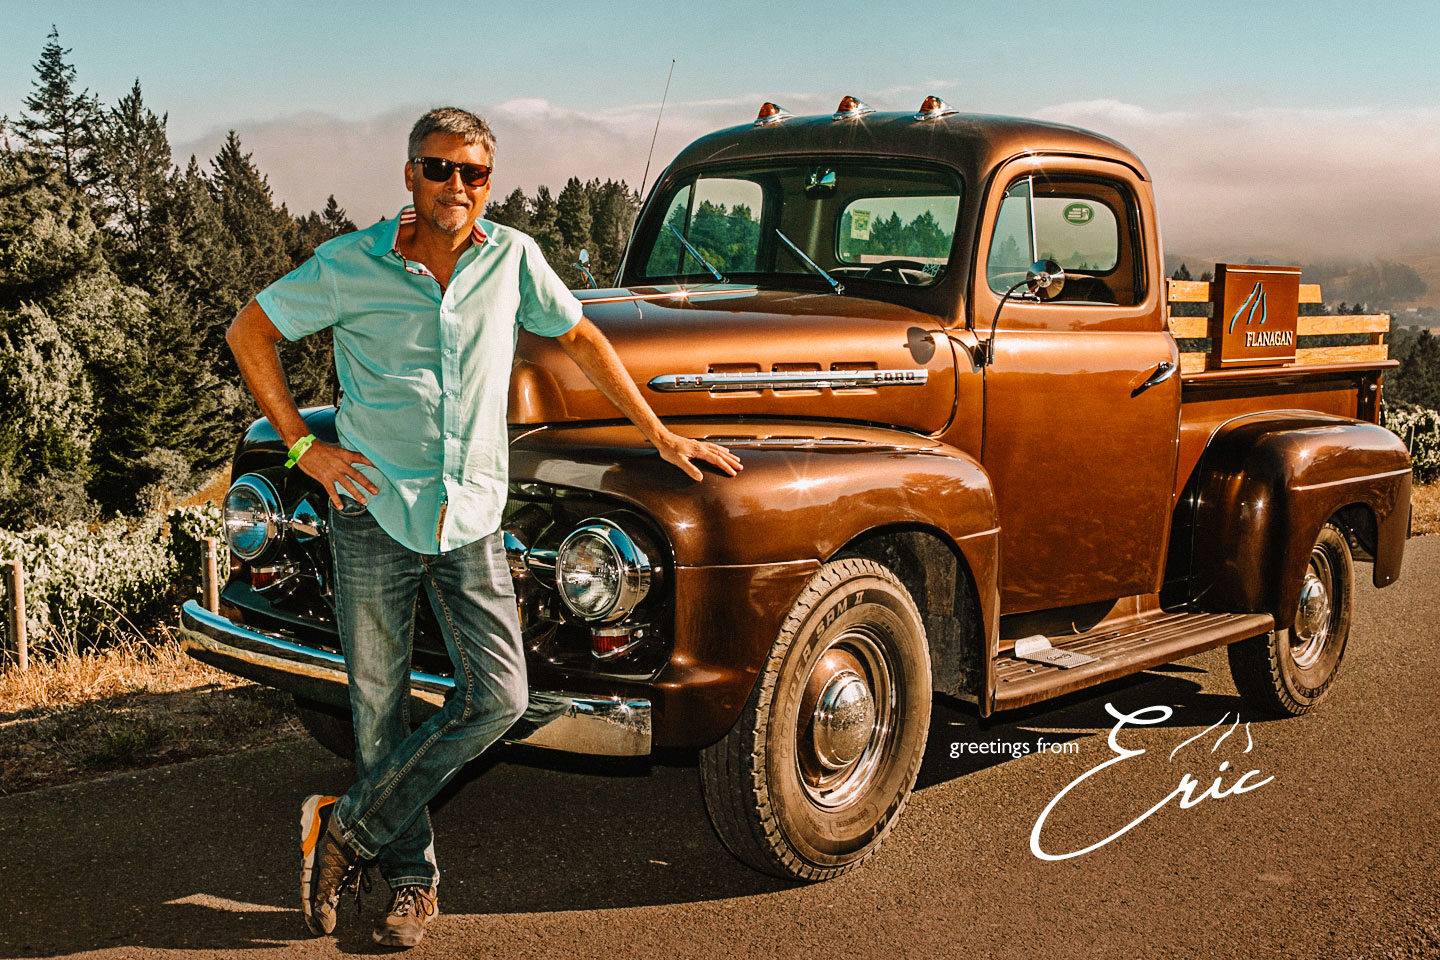 Eric standing next to classic truck